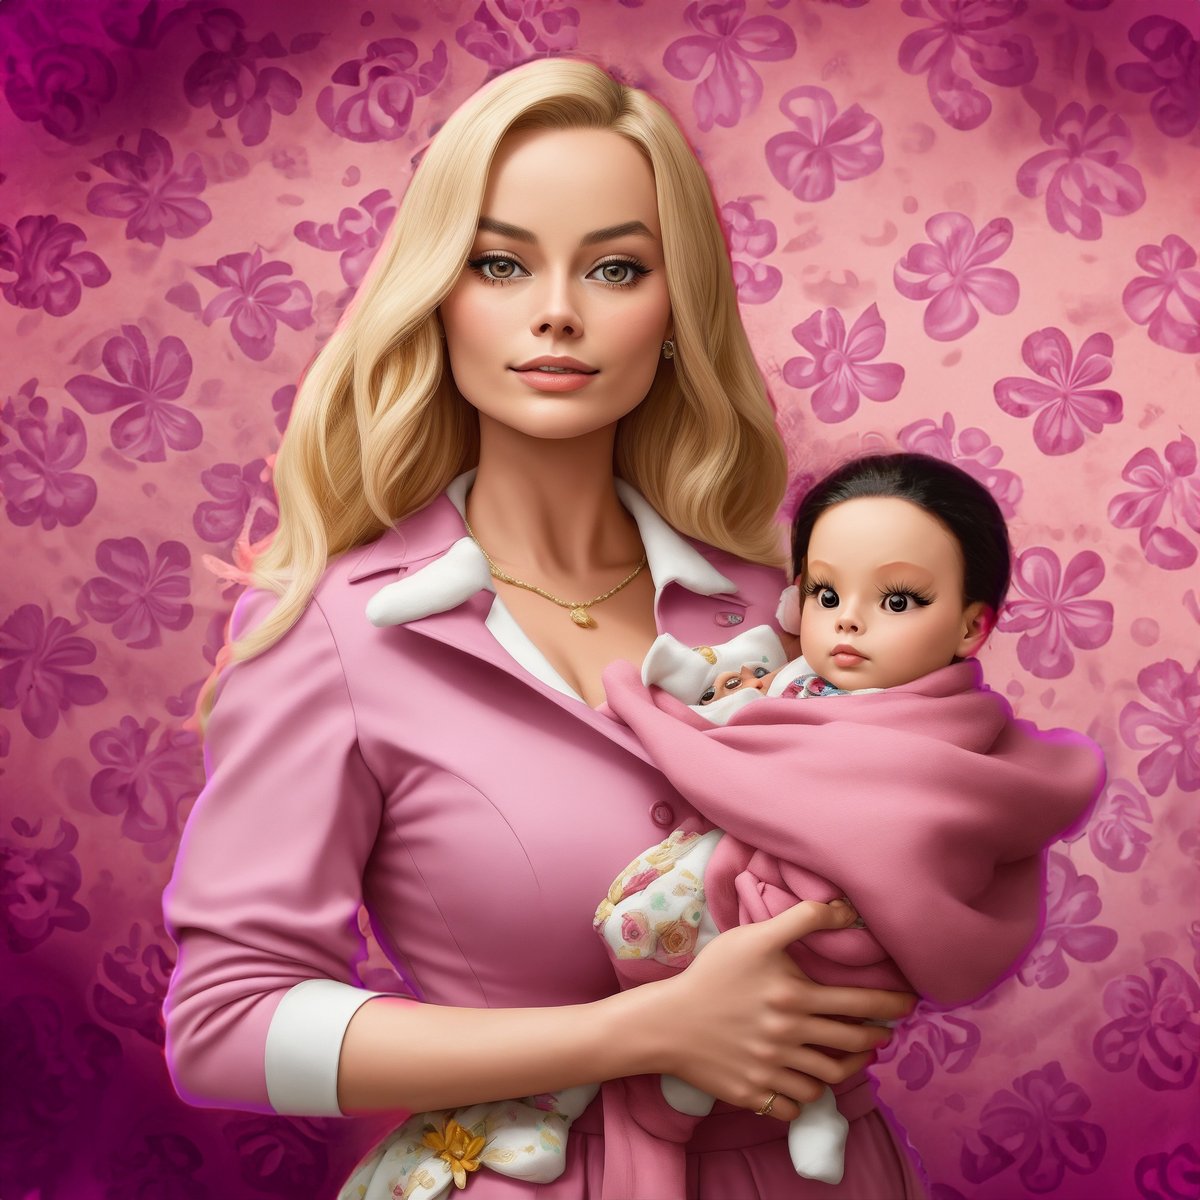 Love and Lessons.   Explore the complexities of the White Savior Complex. Women now use Barbie's story as a lens to discern genuine partners.
#BarbieMovie #WhiteSaviorComplex #Inclusivity #AdopteeVoices #Adoption #barbie
#aiart #aiartwork #aiartcommunity shorturl.at/hkMW3